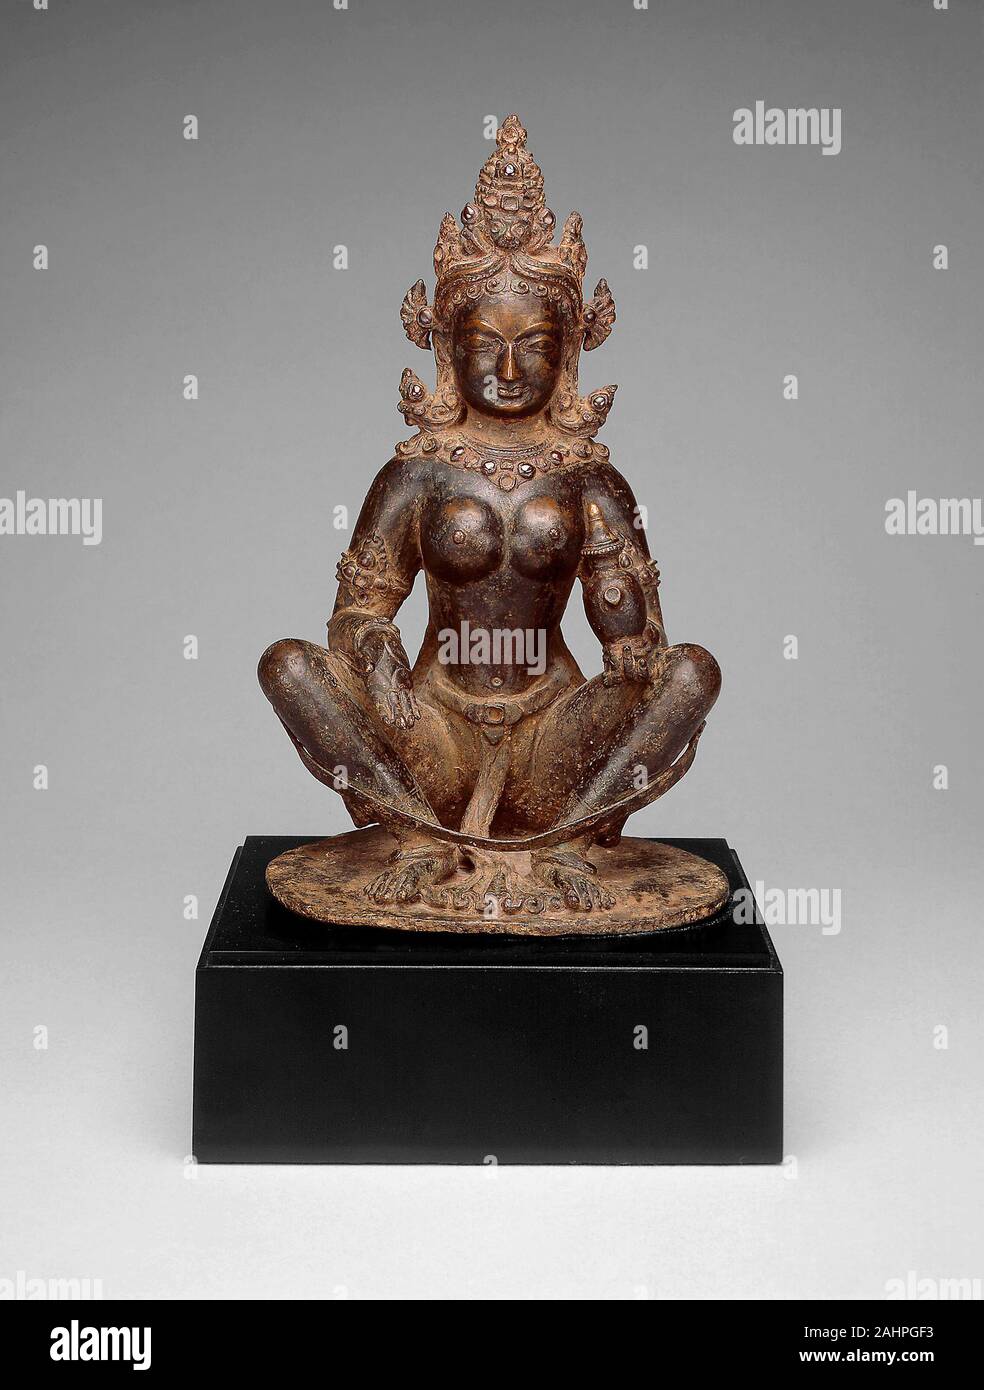 Mother-Goddess Brahmani Seated in Yogic Posture Holding Water Pot. 1201–1300. Nepal. Copper alloy This tantric Hindu female goddess is usually part of a set of seven mother goddesses (Brahmani, Vaishnavi, Maheshvari, Indrani, Kaumari, Varahi and Chamunda) called matrikas, but she is also revered as a goddess in her own right. The matrikas are the female shaktis (power, energy) of the male gods, and Brahmani is the shakti of the creator god Brahma. Like Brahma, she is typically shown with four heads (with the fourth one understood to be at the back), symbolizing omniscience, the four sacred scr Stock Photo